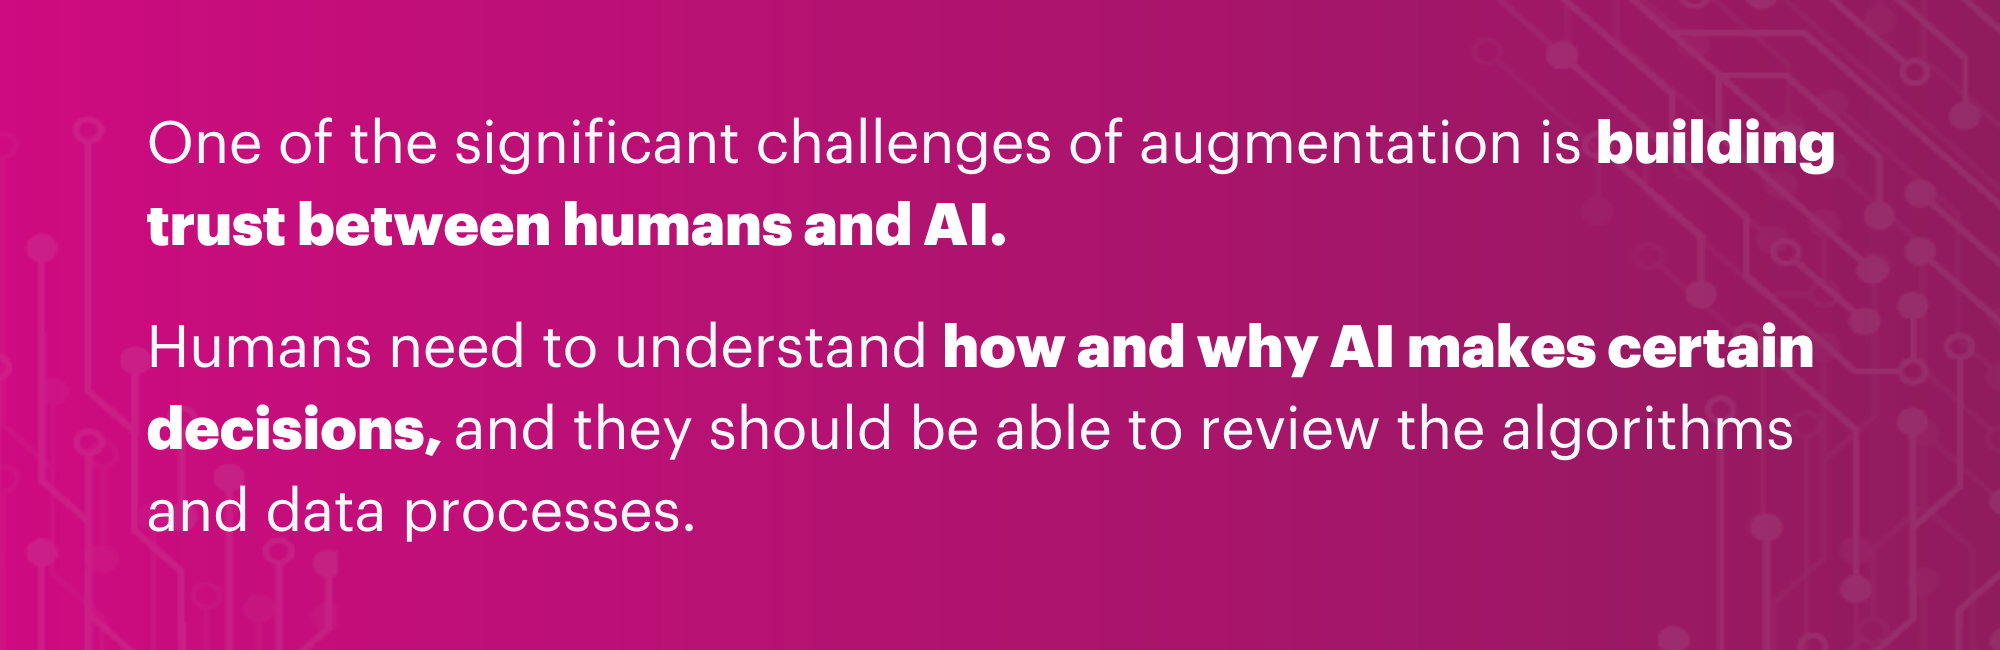 One of the significant challenges of augmentation is building trust between humans and AI. Humans need to understand how and why AI makes certain decisions, and they should be able to review the algorithms and data processes. Transparency and open communication will be key in building trust and ensuring that AI is used ethically and for the benefit of humans.